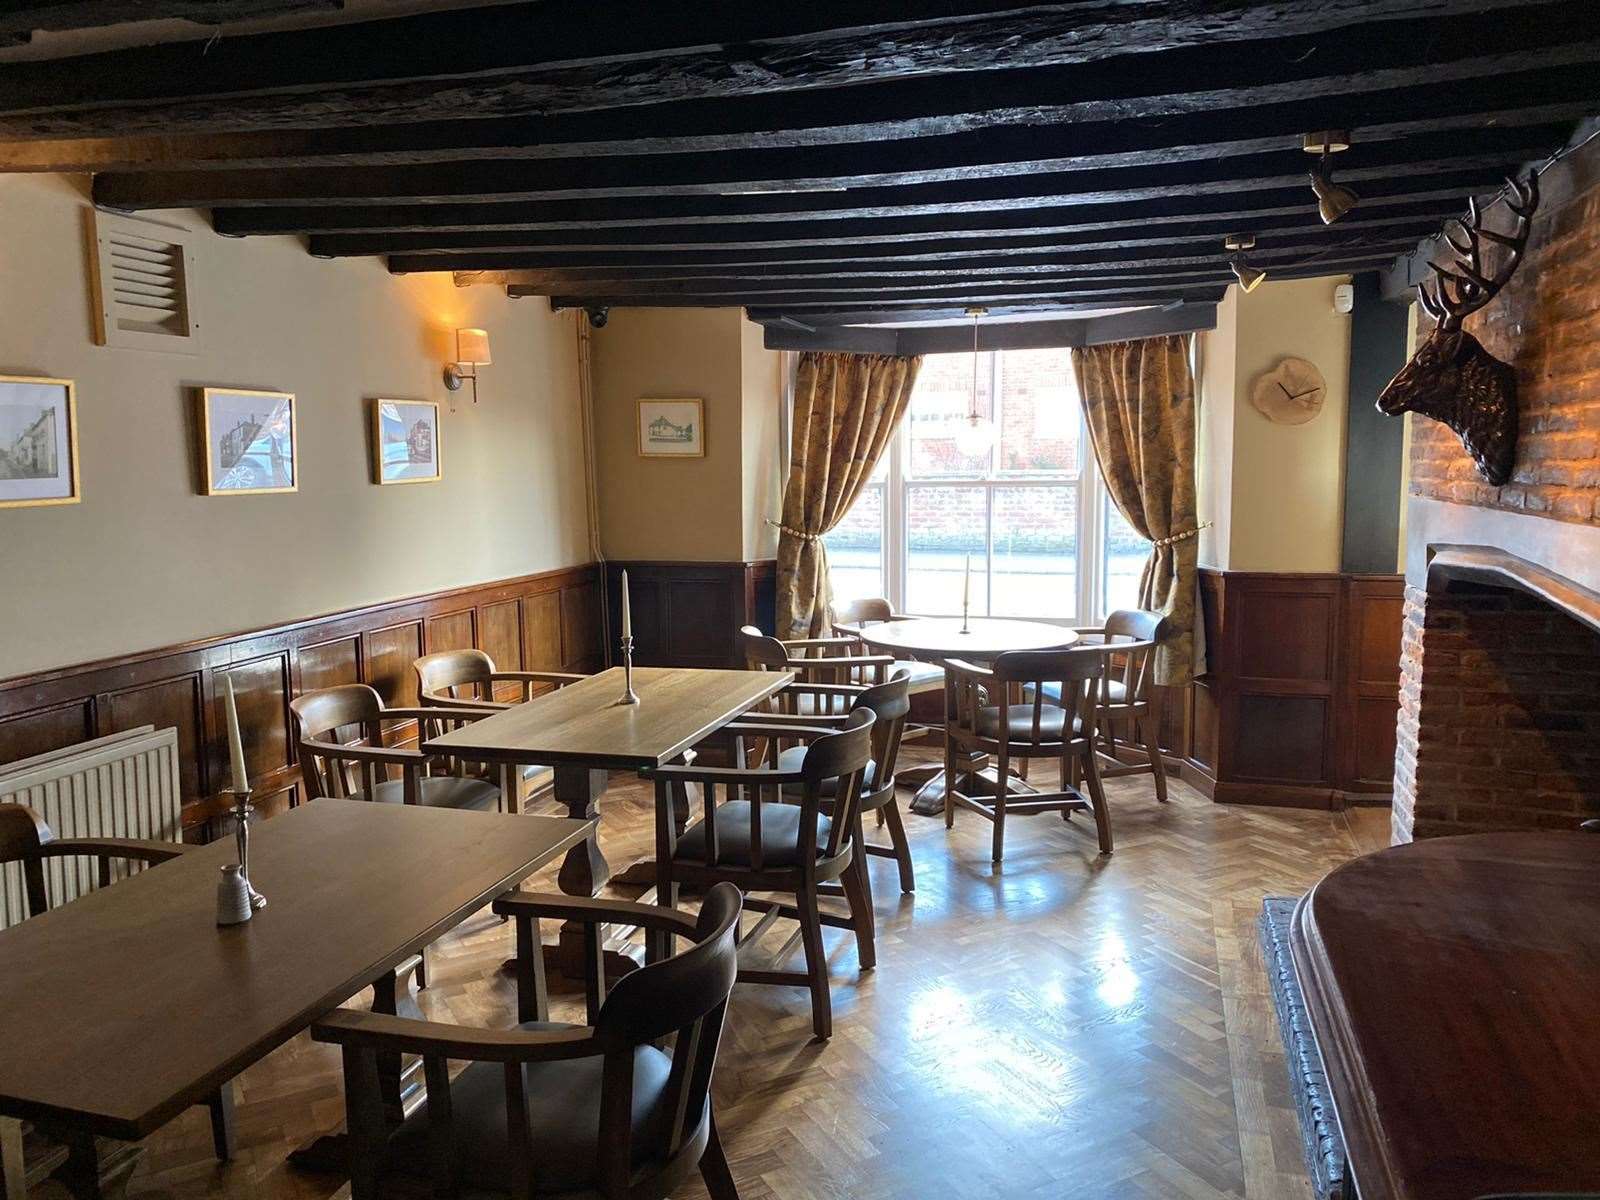 The pub is now fully refurbished and is set to open next month